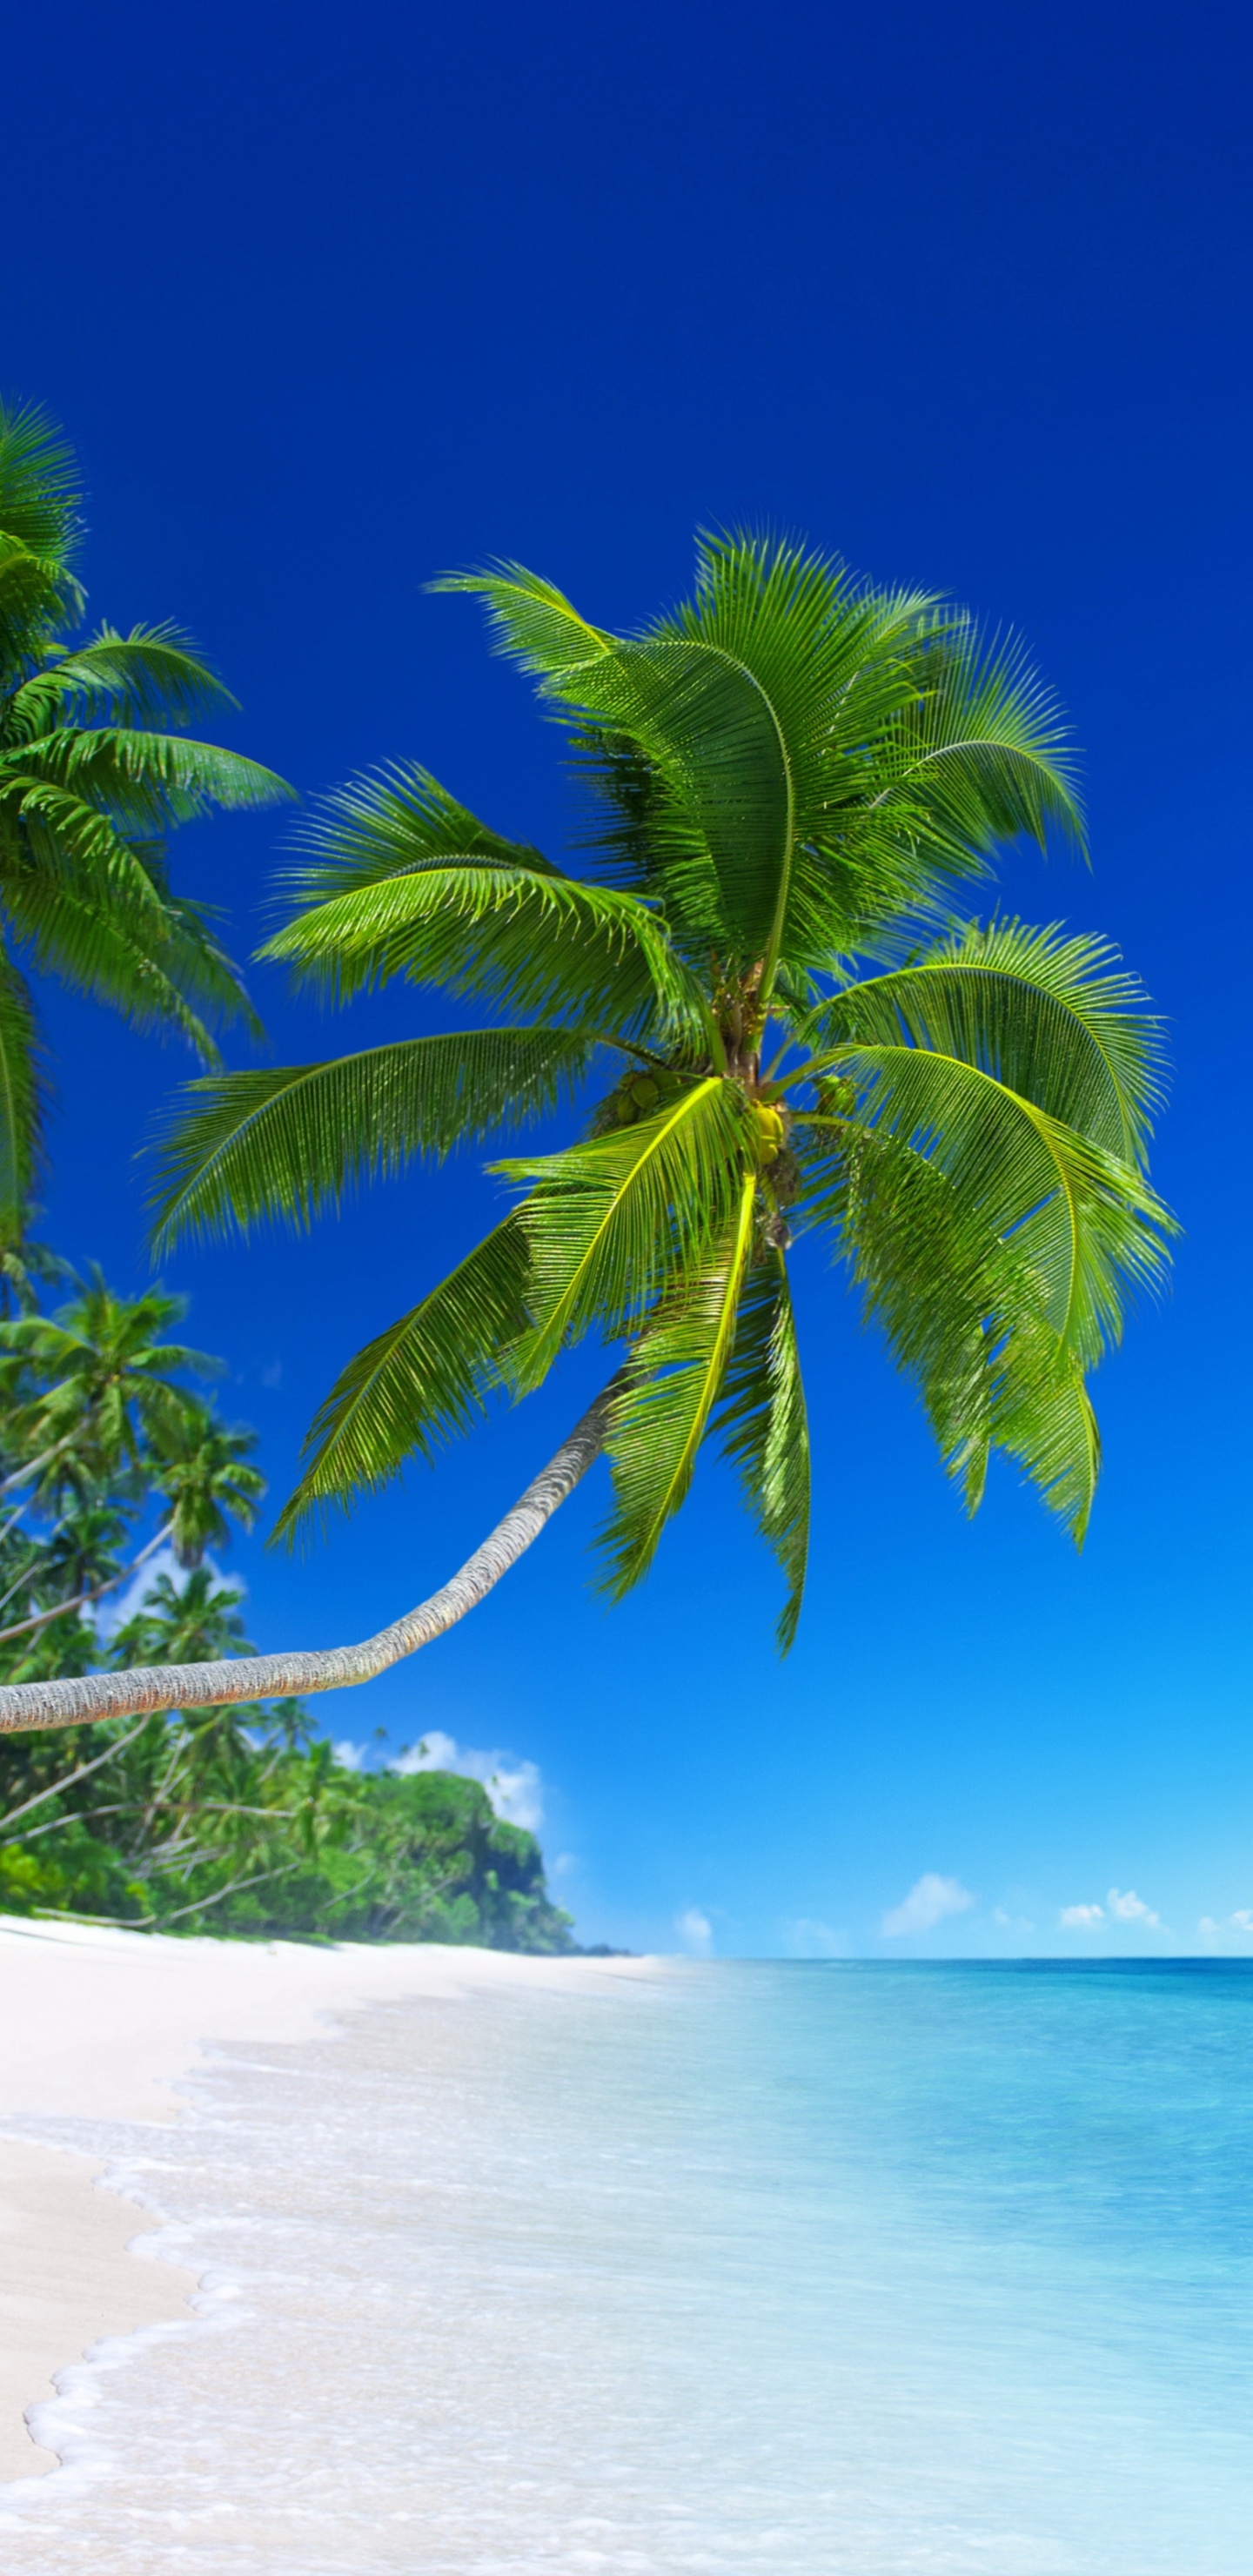 Green Palm Tree on White Sand Beach During Daytime. Wallpaper in 1440x2960 Resolution